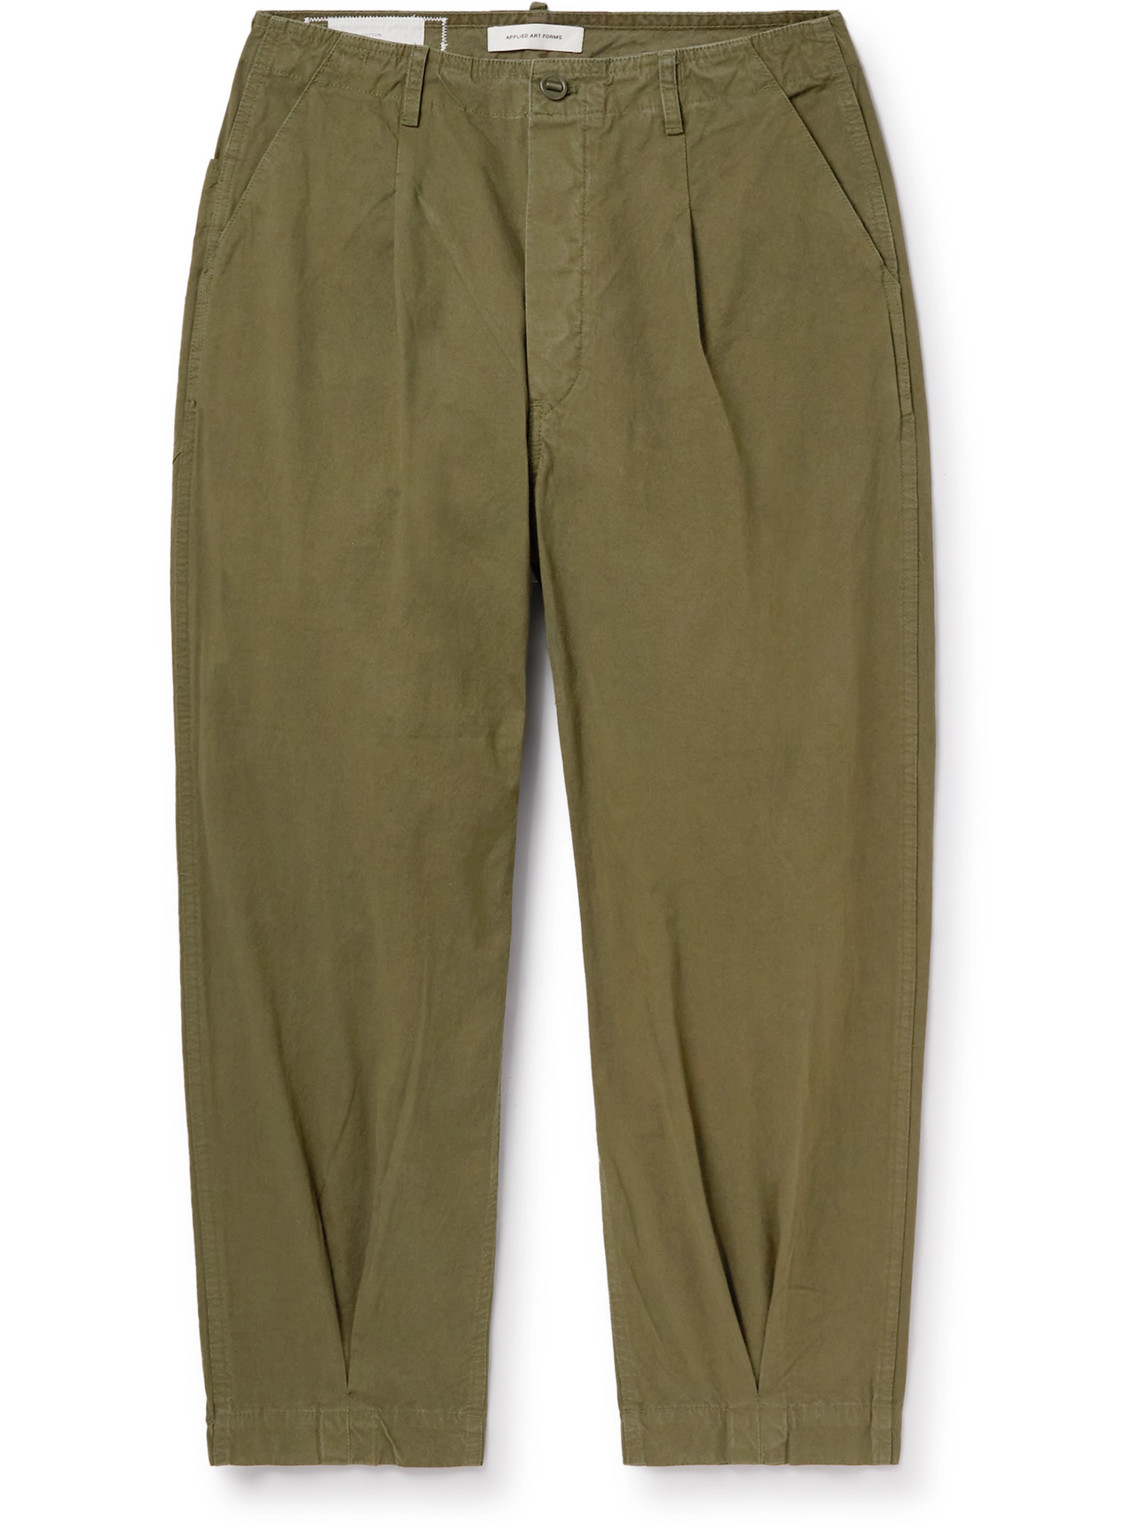 DM1-1 Tapered Pleated Cotton and CORDURA-Blend Trousers